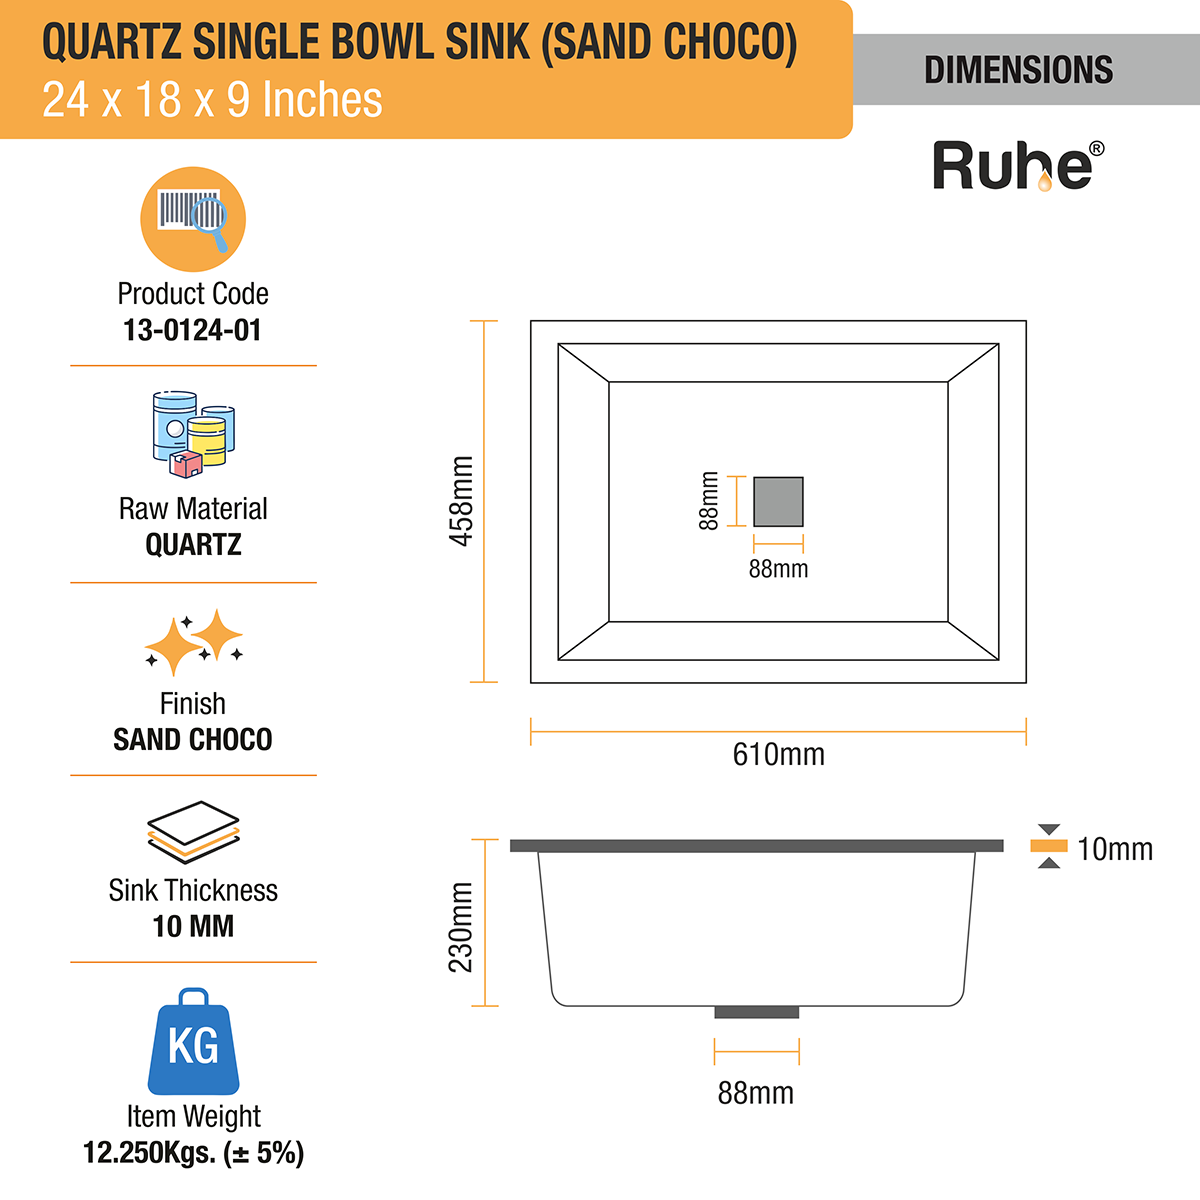 Quartz Single Bowl Sand Choco Kitchen Sink (24 x 18 x 9 inches) dimensions, raw material, item weight and sizes